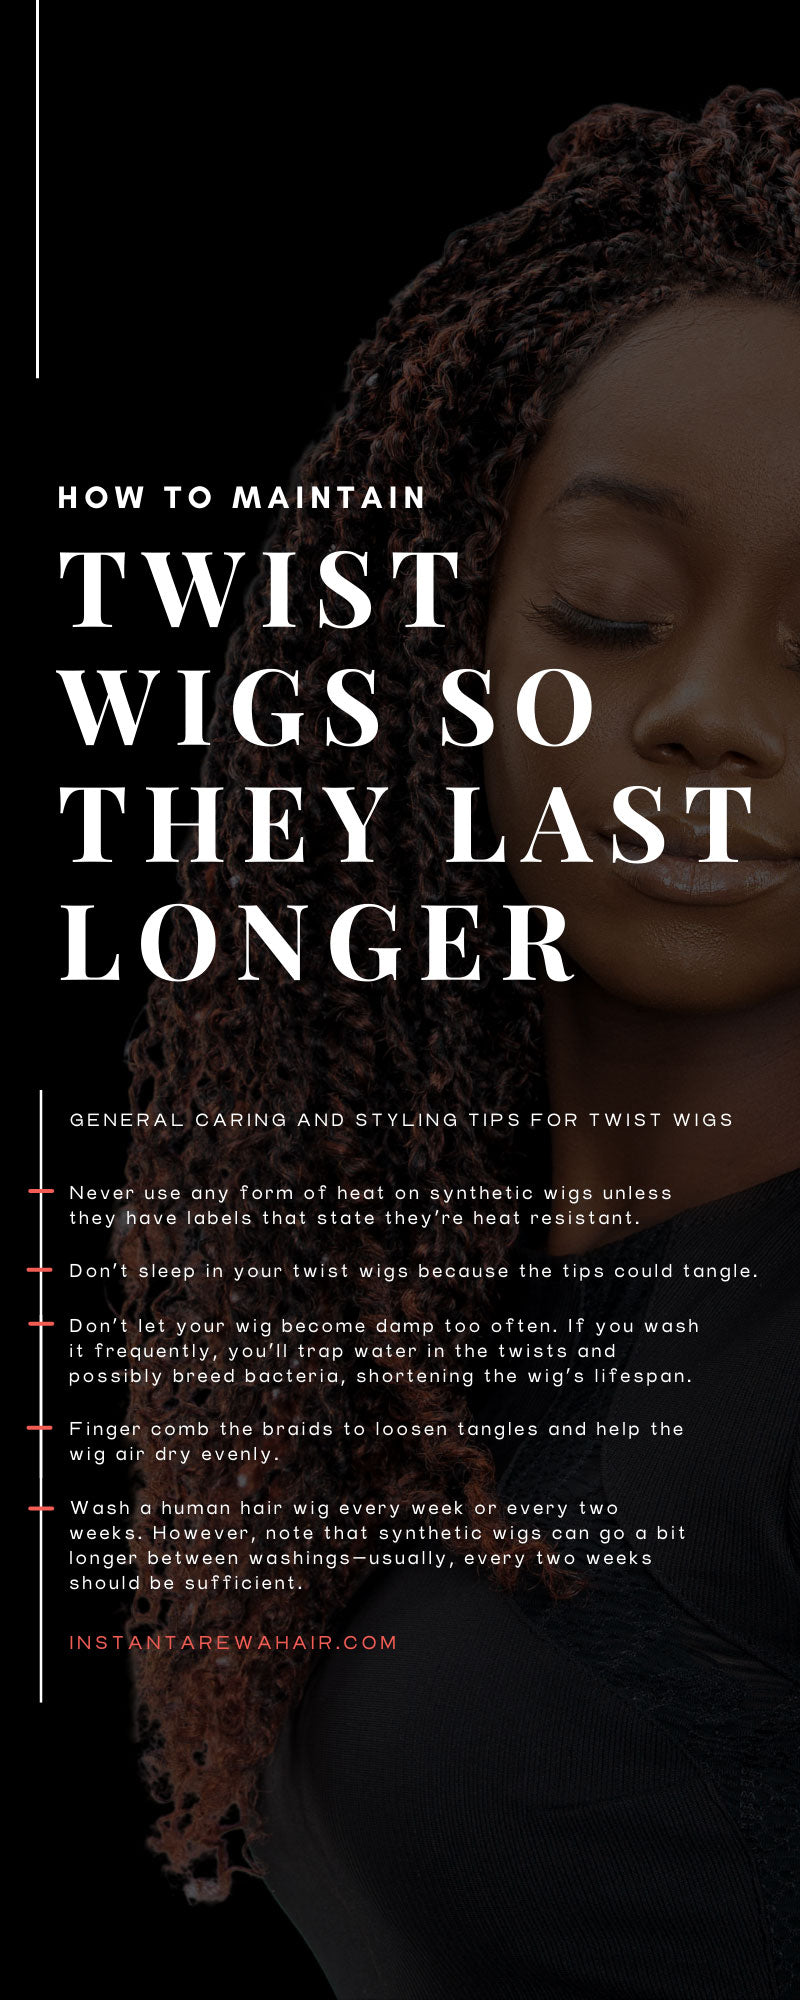 How To Maintain Twist Wigs so They Last Longer